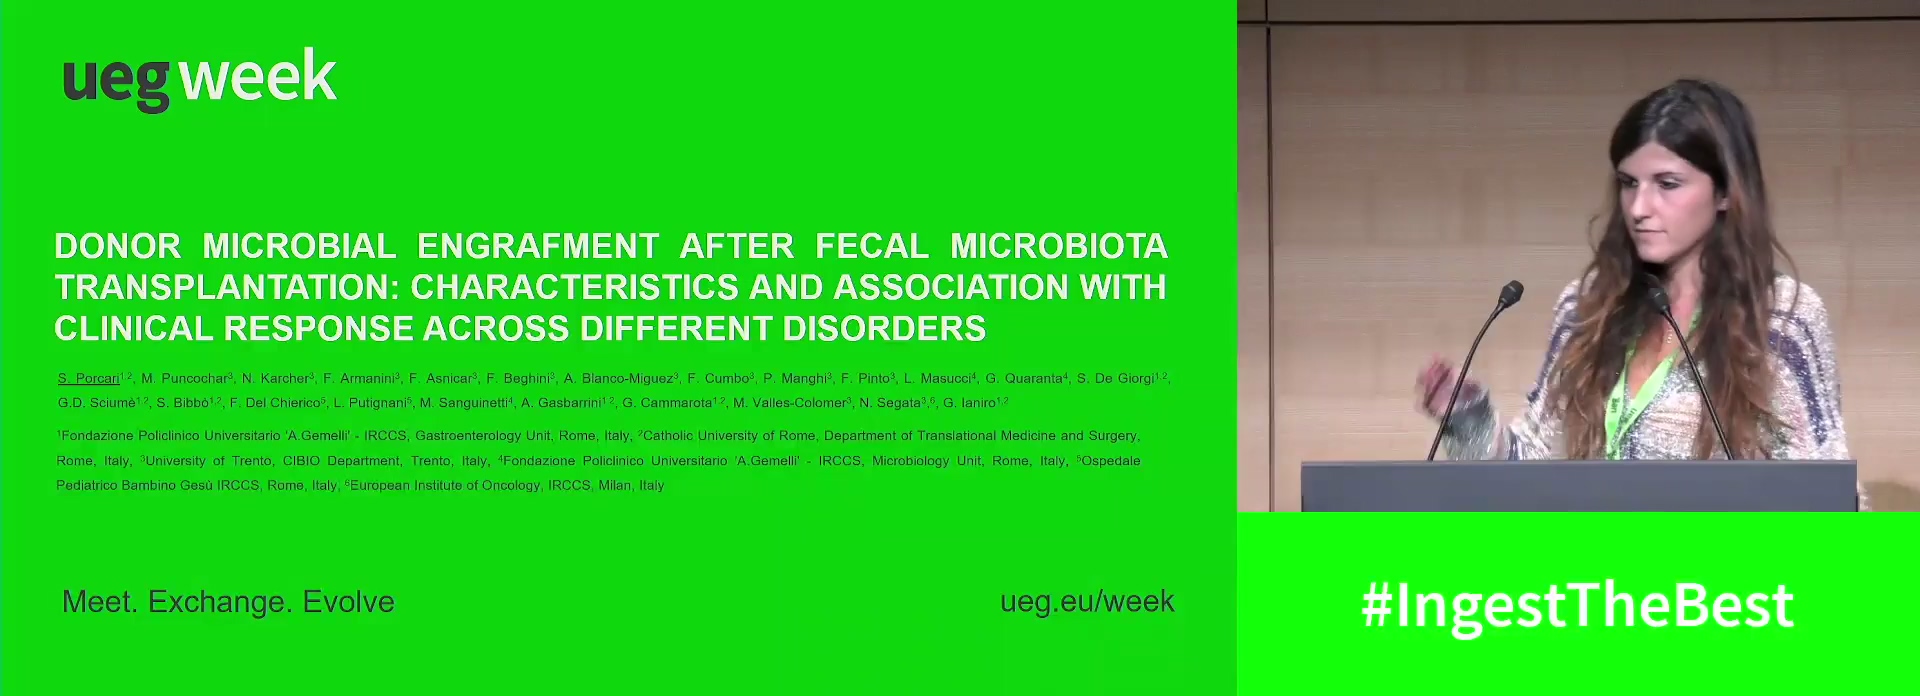 DONOR MICROBIAL ENGRAFMENT AFTER FECAL MICROBIOTA TRANSPLANTATION: CHARACTERISTICS AND ASSOCIATION WITH CLINICAL RESPONSE ACROSS DIFFERENT DISORDERS